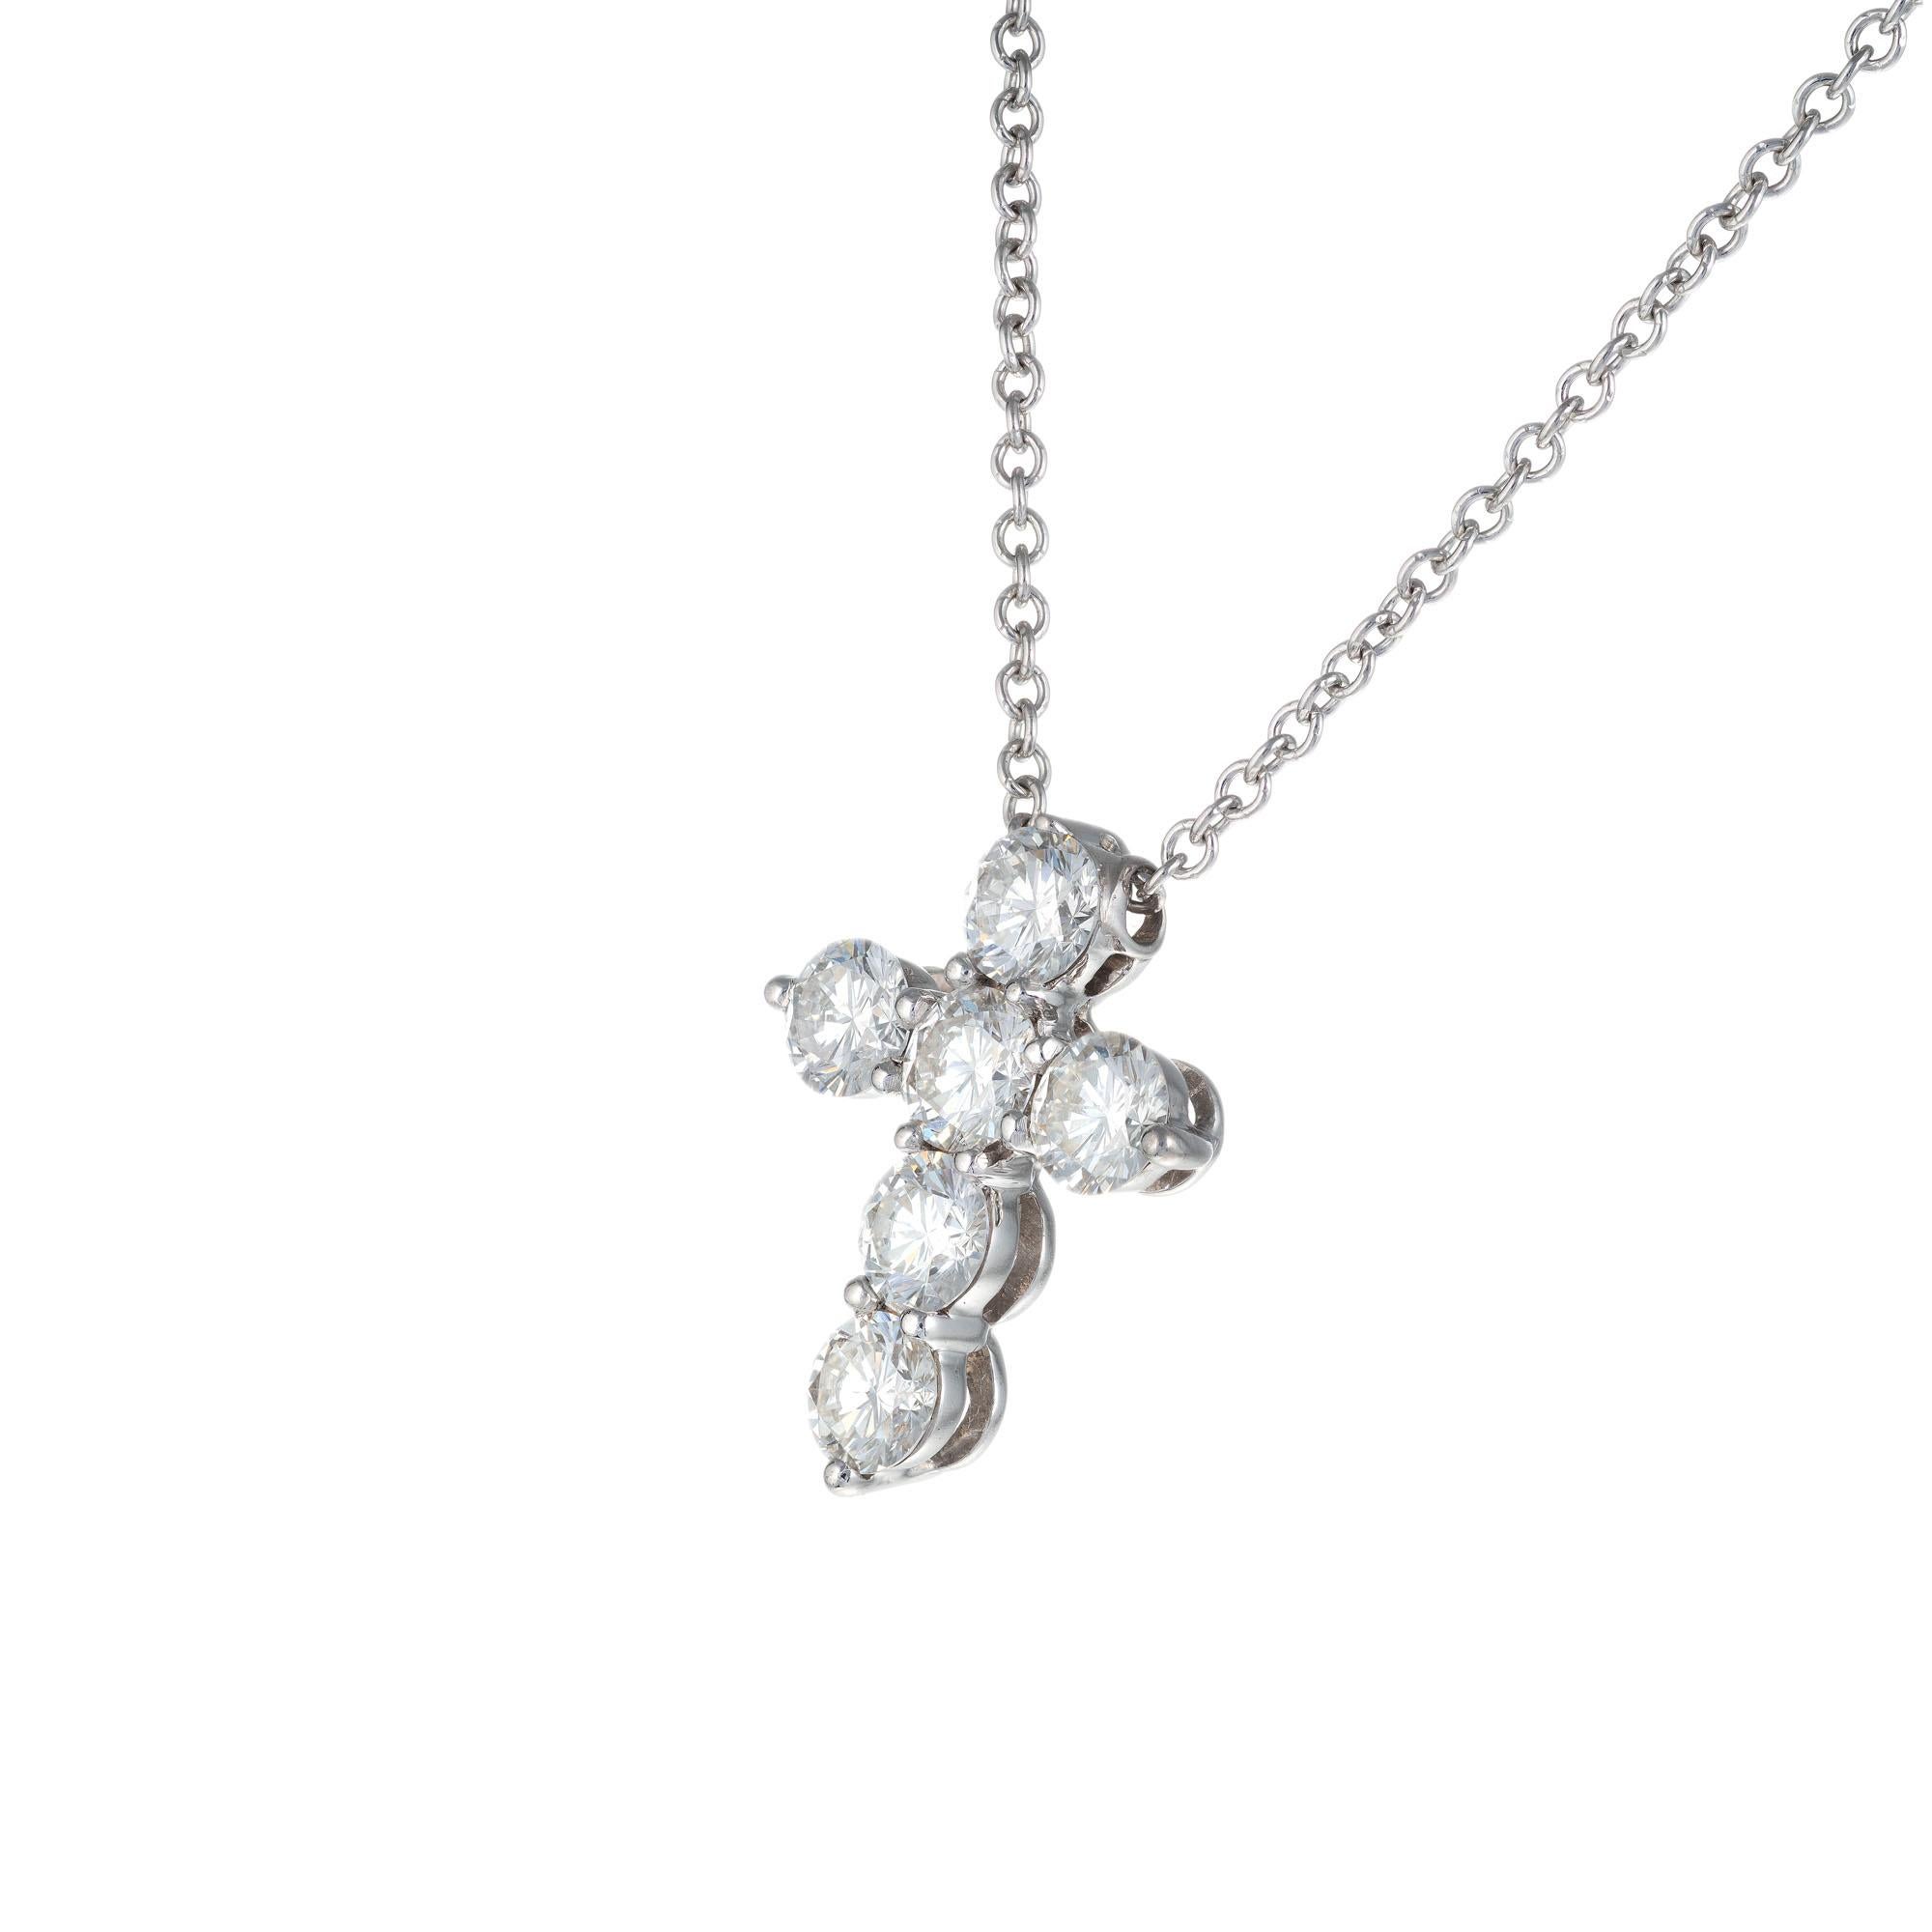 .90ct 6 round brilliant cut diamond cross pendant necklace, set in 18k white gold with a 16 inch 18k white gold chain. 

6 round brilliant cut diamonds G-H, SI approx. .90cts
18k white gold 
Stamped: 18k
3.4 grams
Top to bottom: 15.5mm or 5/8